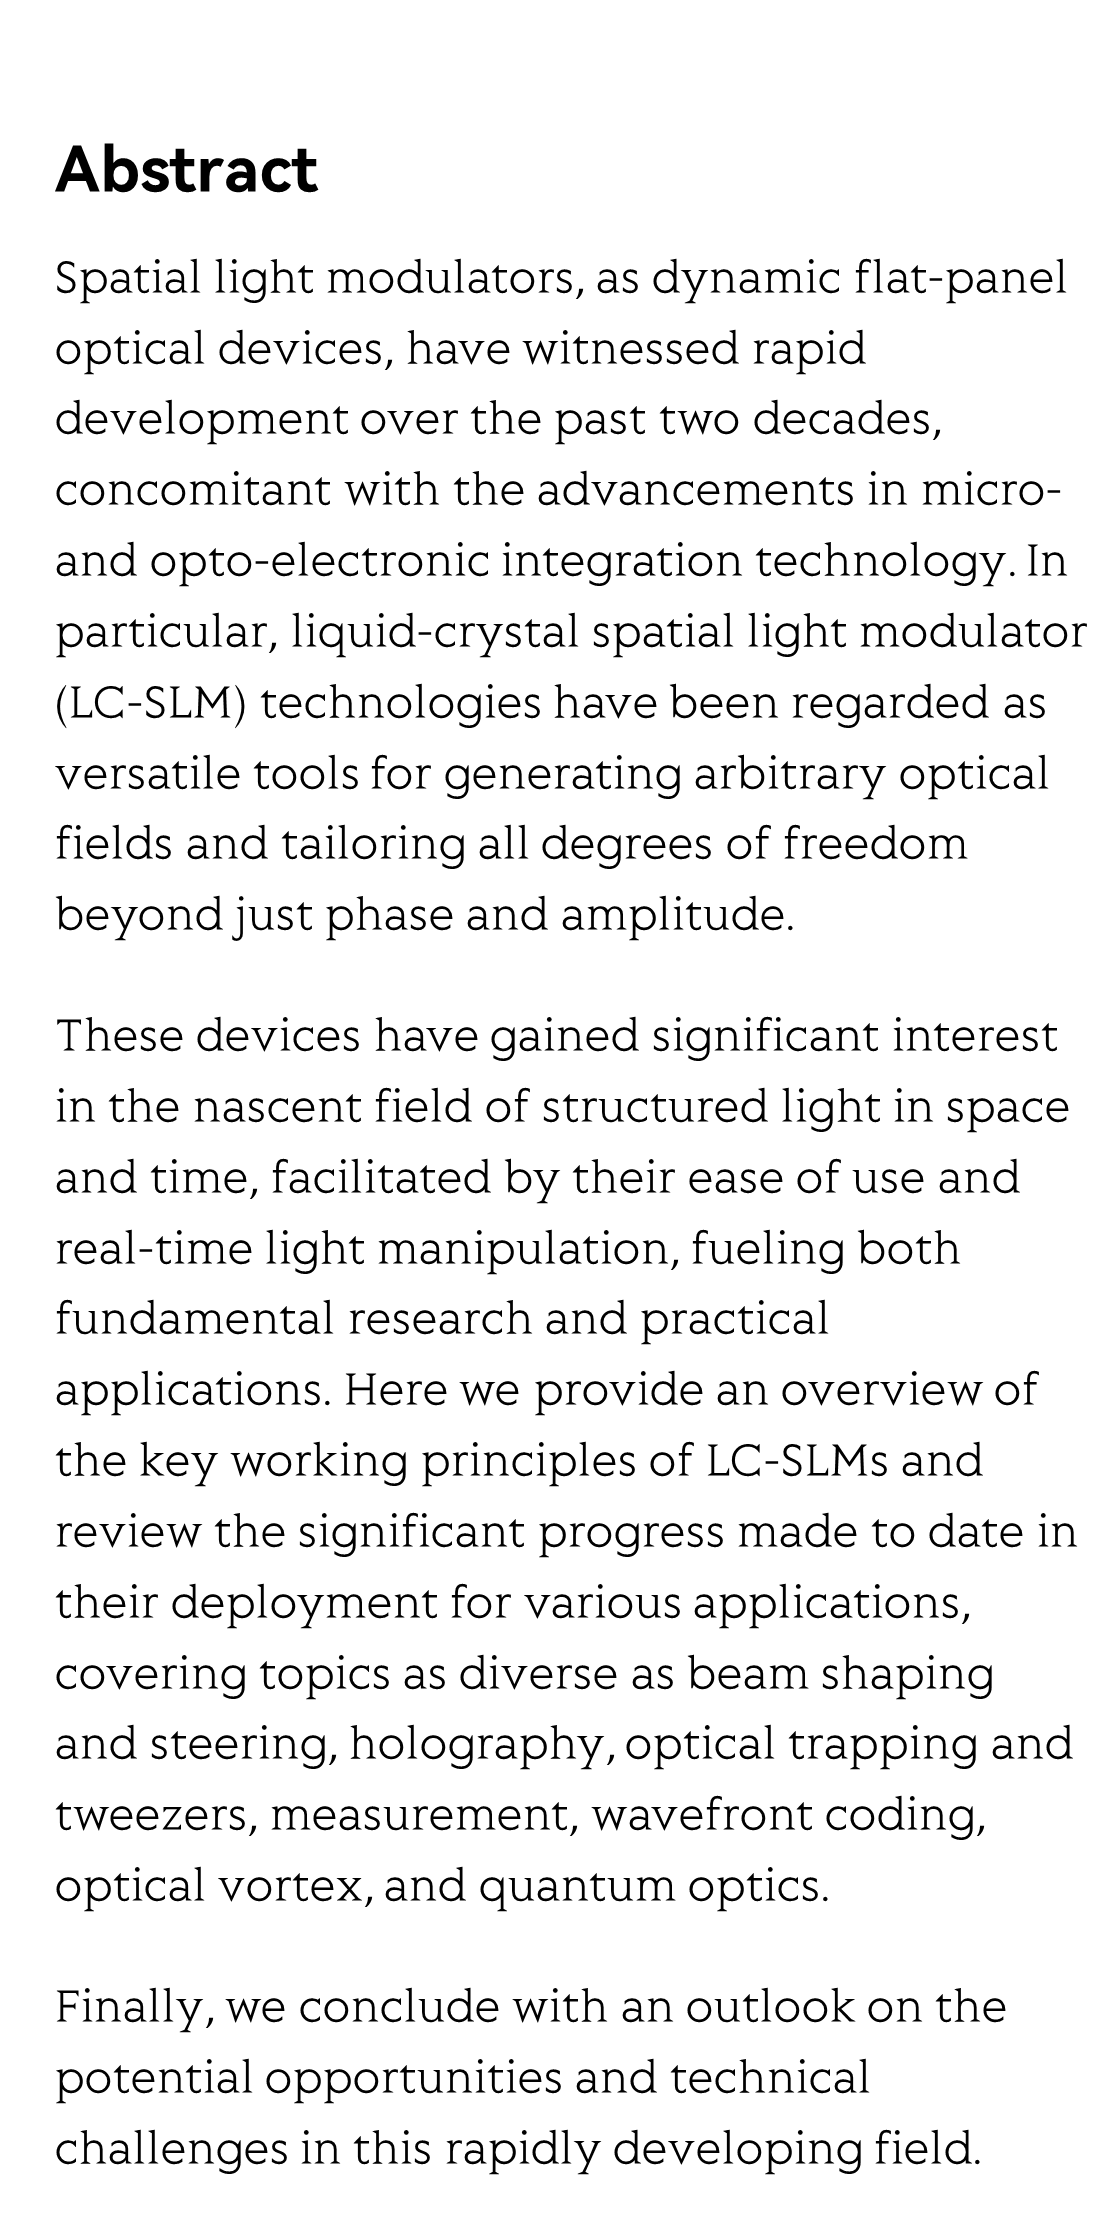 A review of liquid crystal spatial light modulators: devices and applications_2